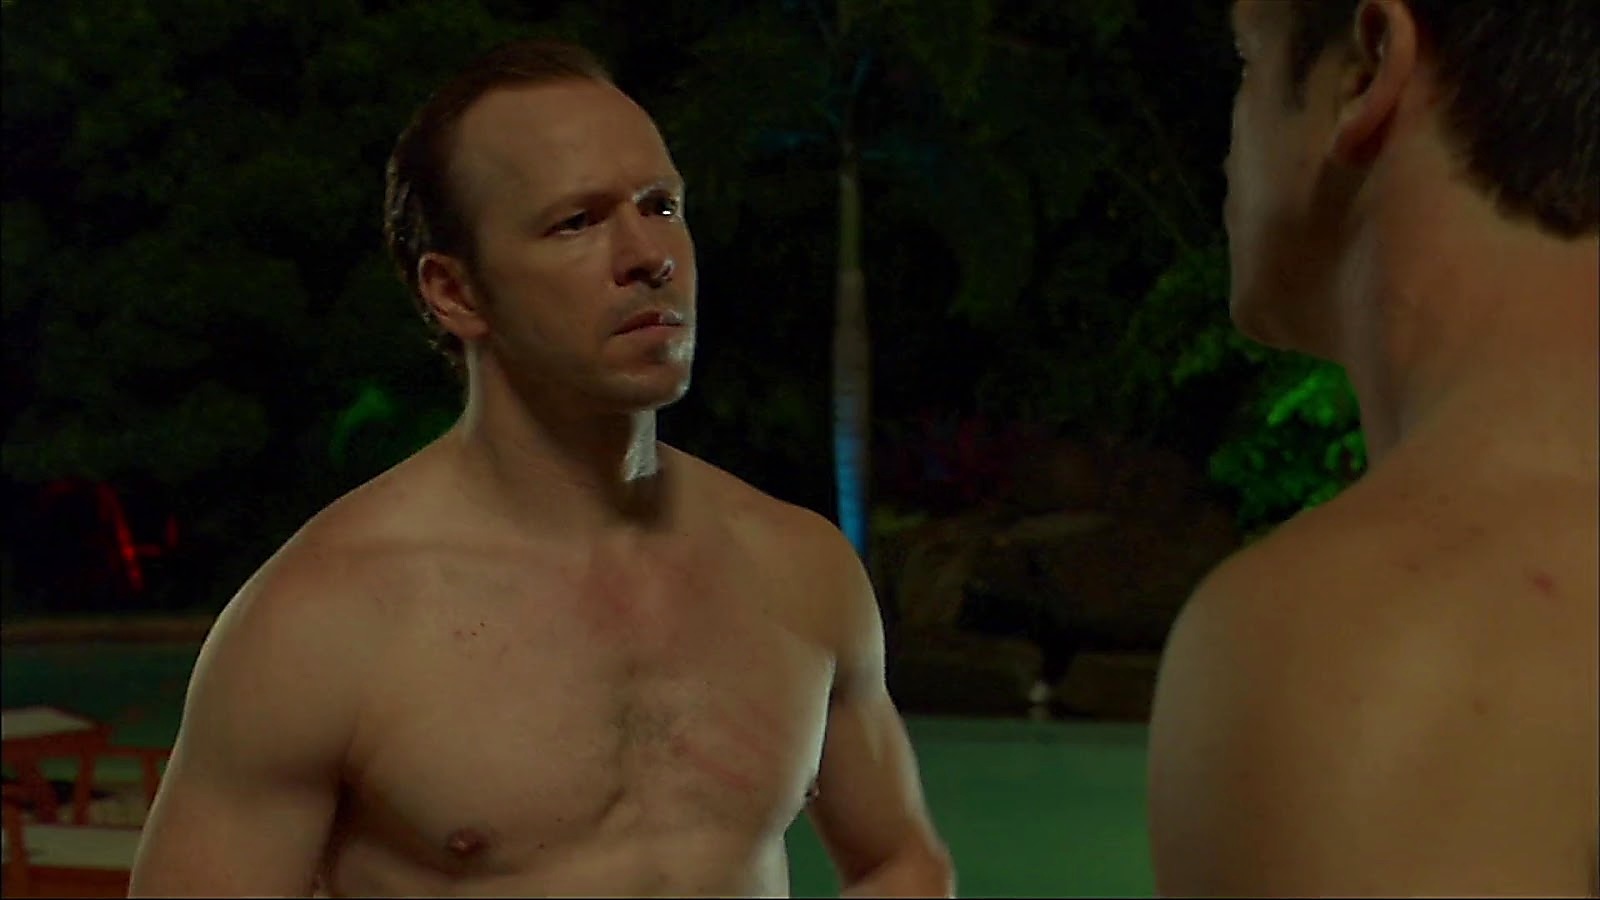 Donnie Wahlberg sexy shirtless scene January 2, 2020, 11am